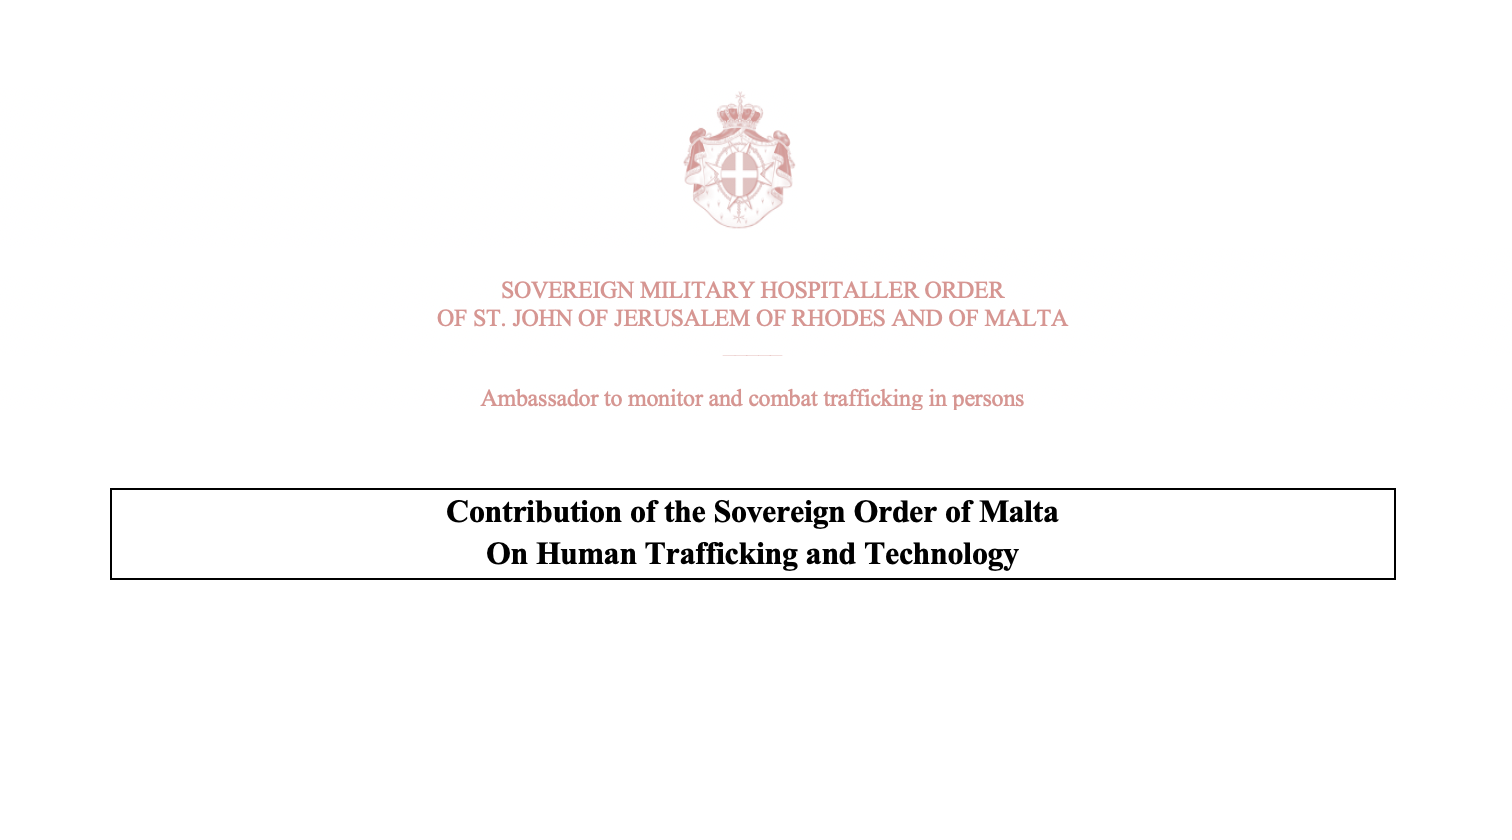 Contribution of the Order of Malta on “The use of technology in facilitating and preventing contemporary forms of slavery”